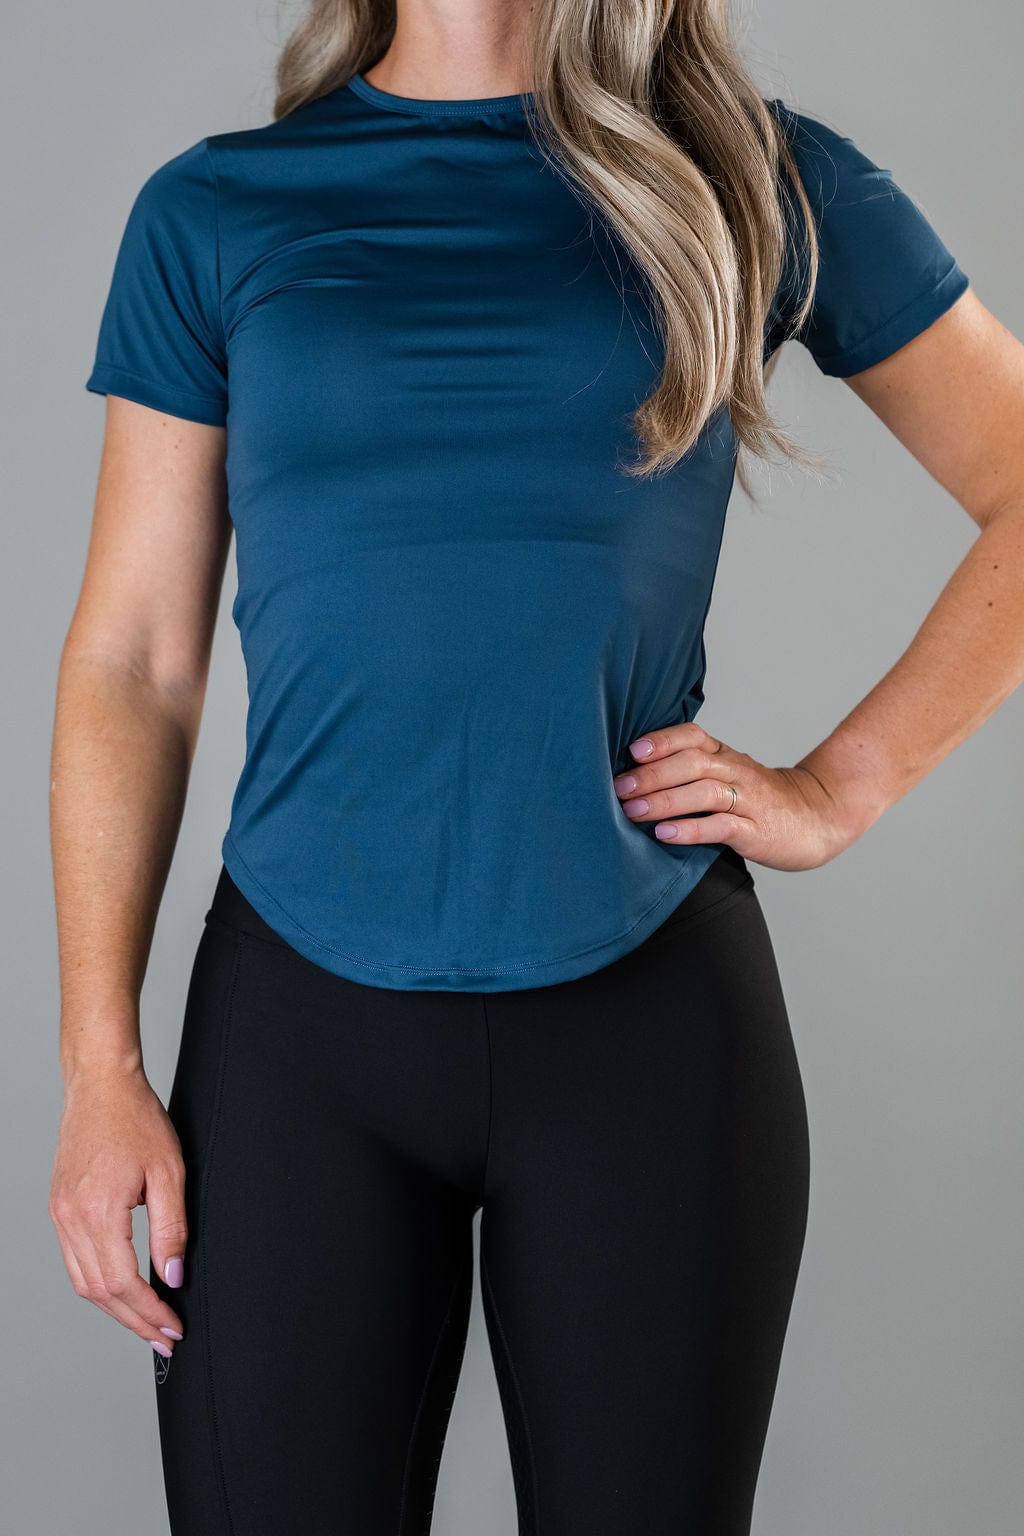 Emerald Blue Relaxed Athletic Top Short sleeve M, L, XL only